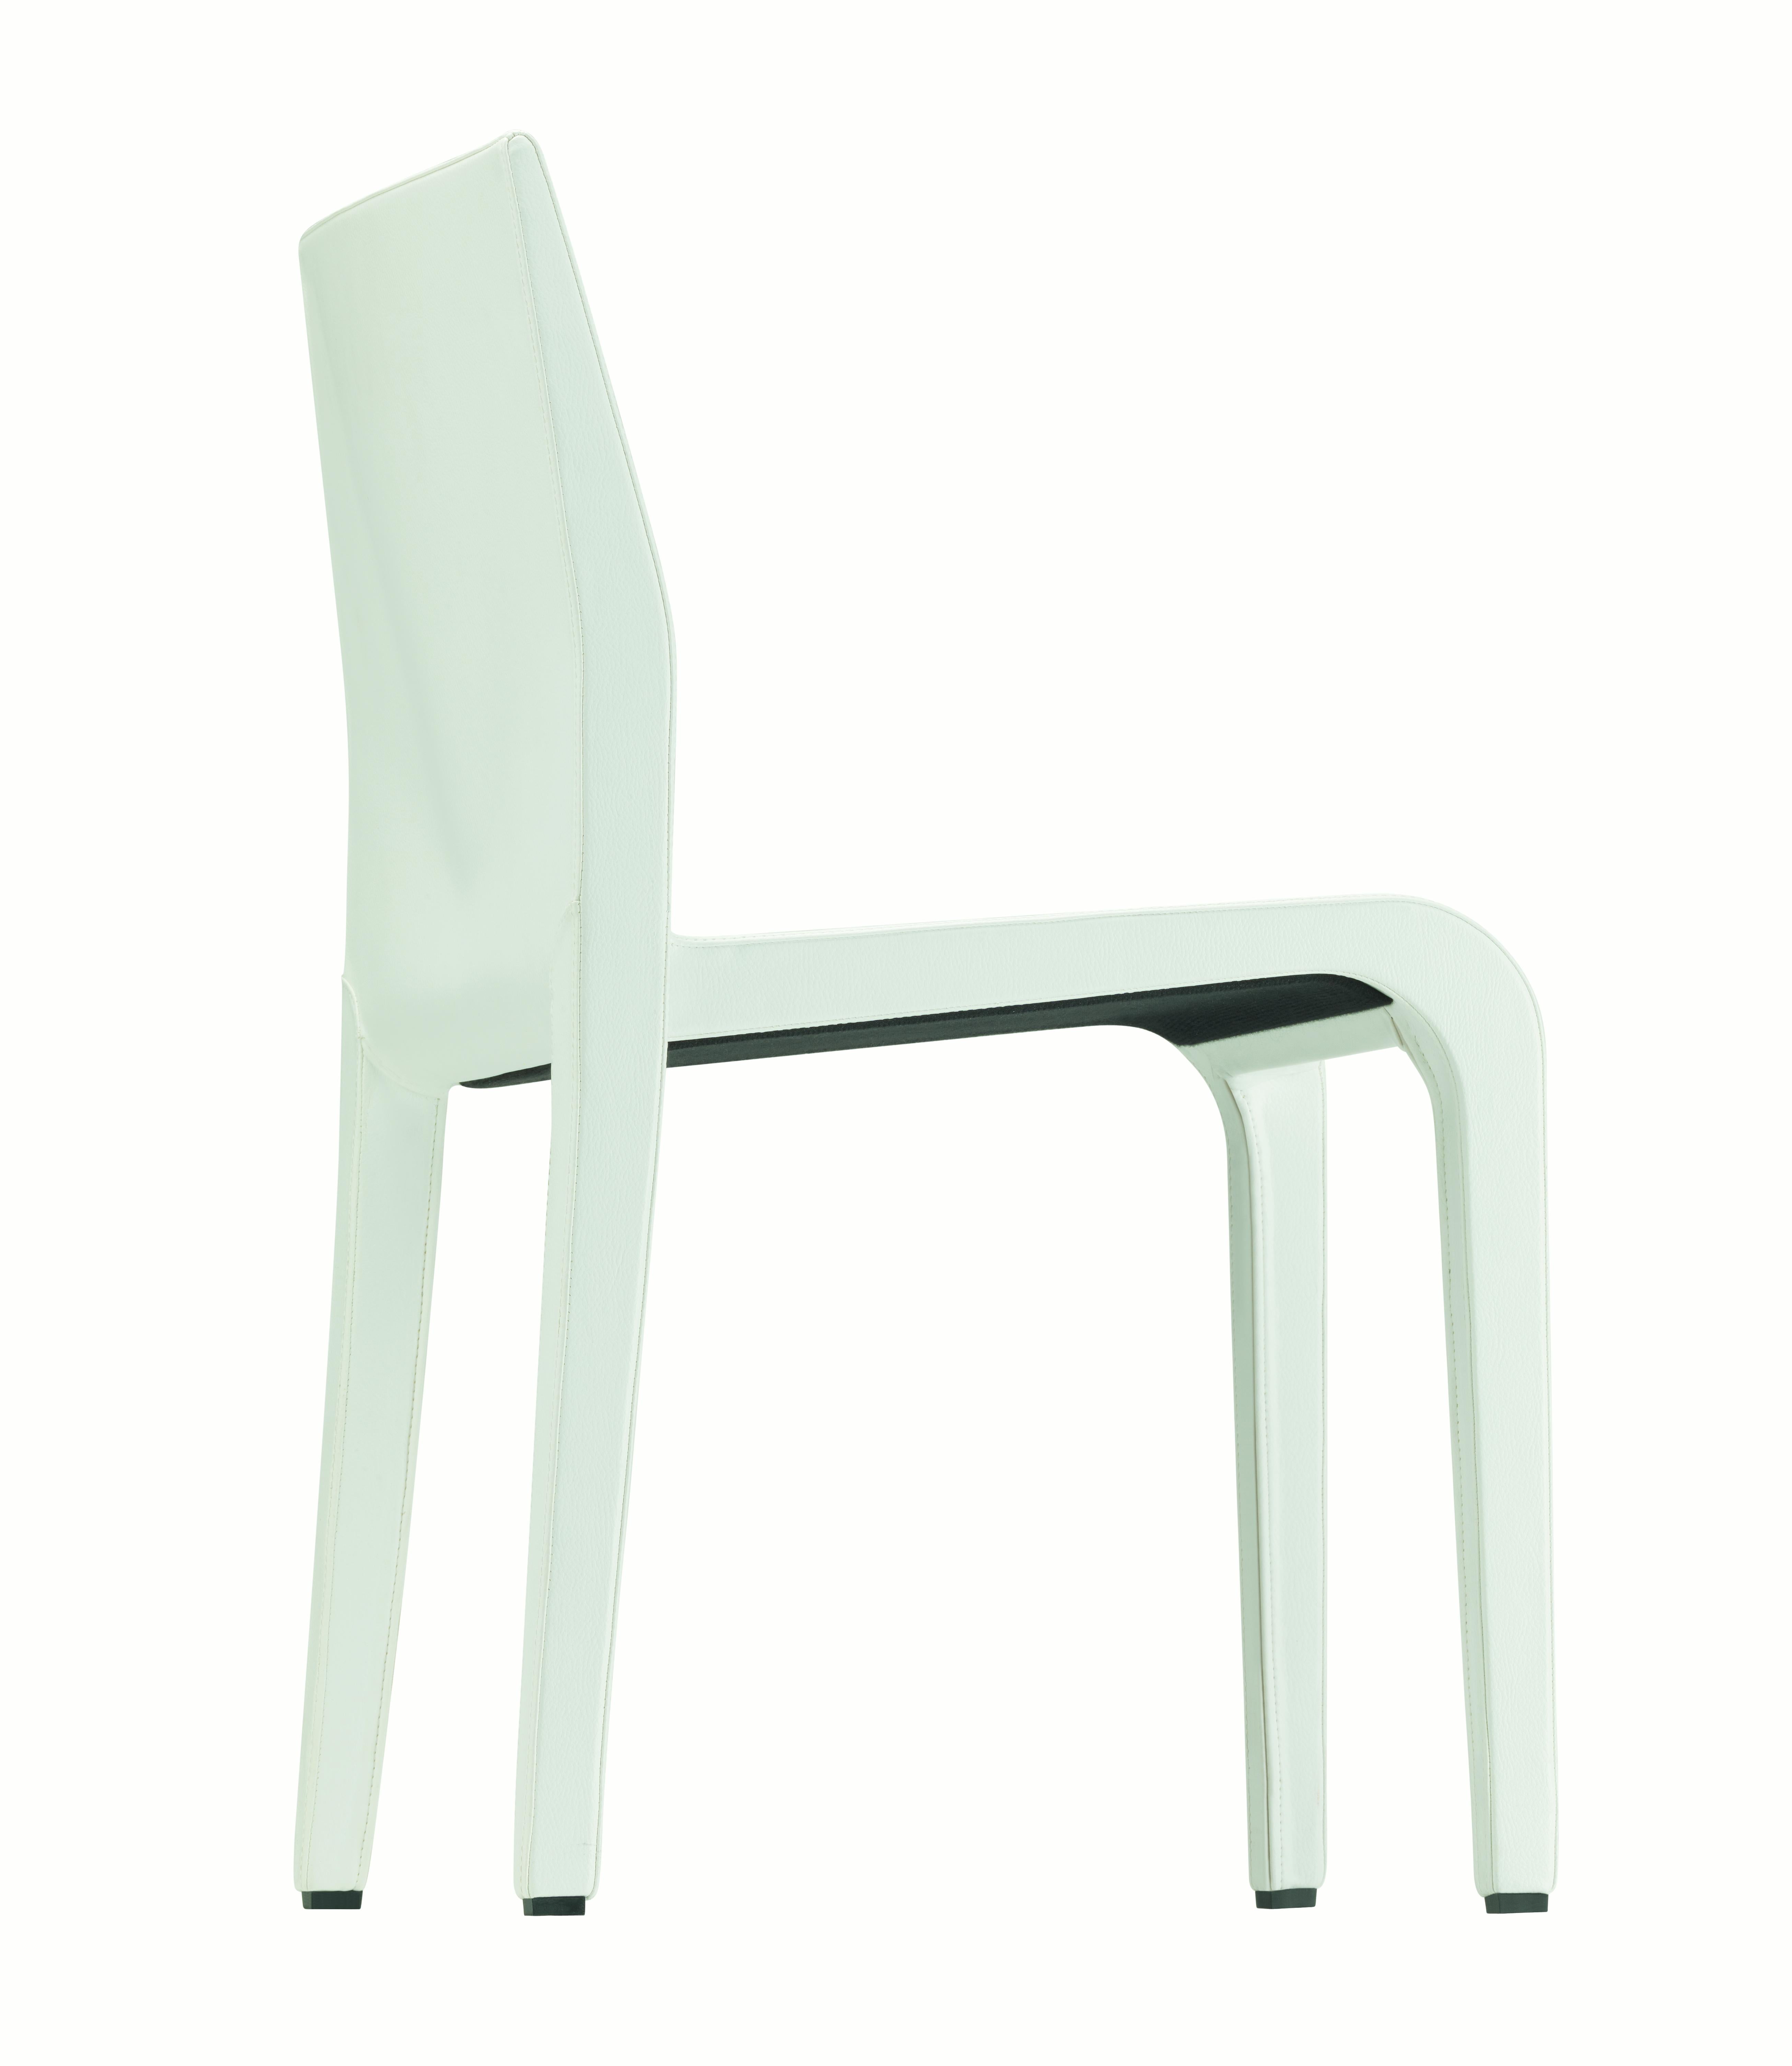 Alias 301 Laleggera Chair in Full White Leather by Riccardo Blumer

Stacking chair with structure in solid maple or ash. Maple veneer or oak veneer. Internal support in injected polyurethane foam. Finish in transparent laquage or in colored